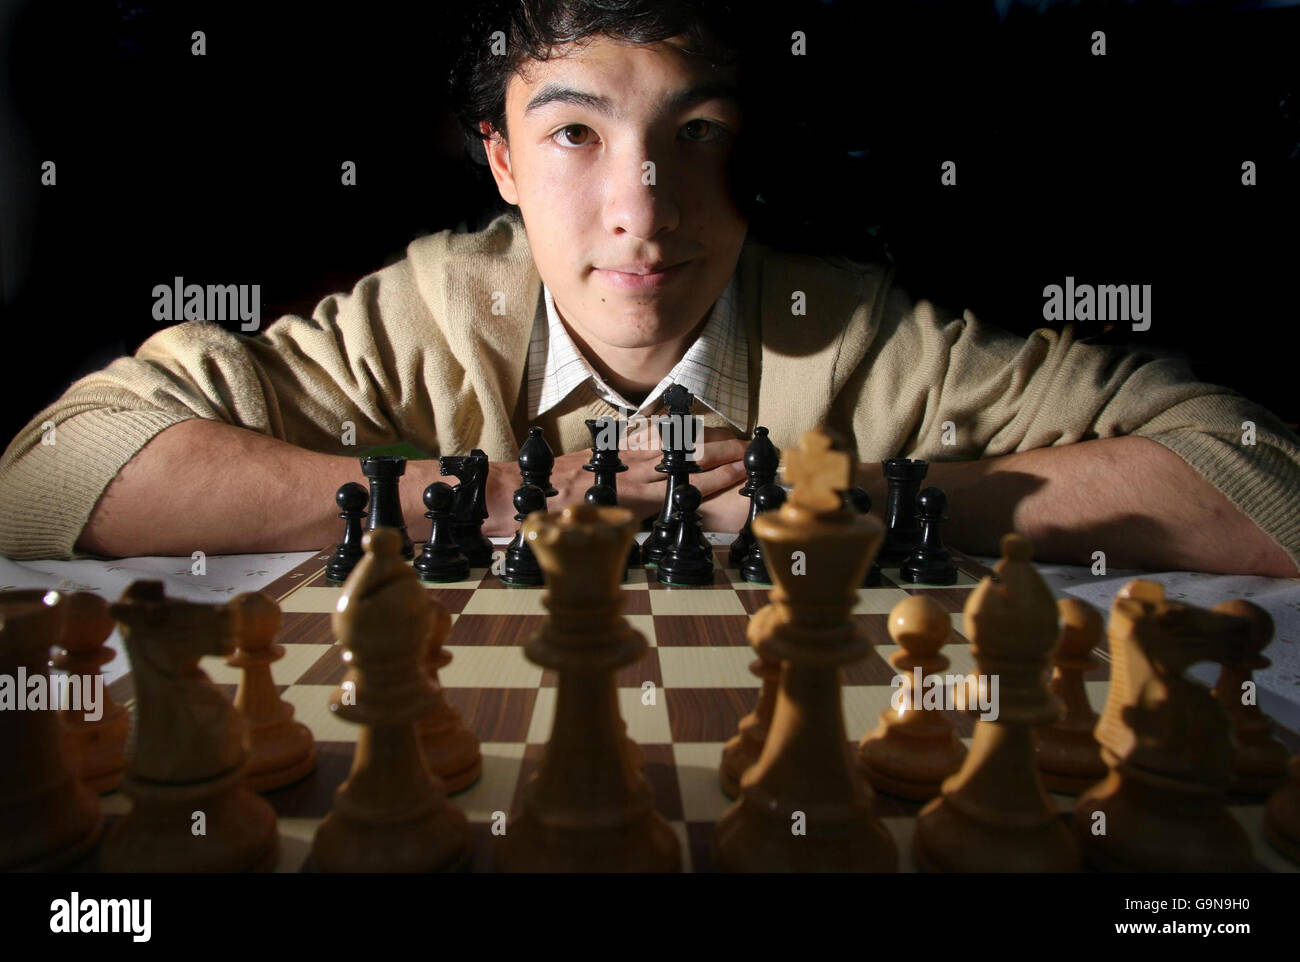 Grandmaster plays 10 simultaneous chess games blindfolded in